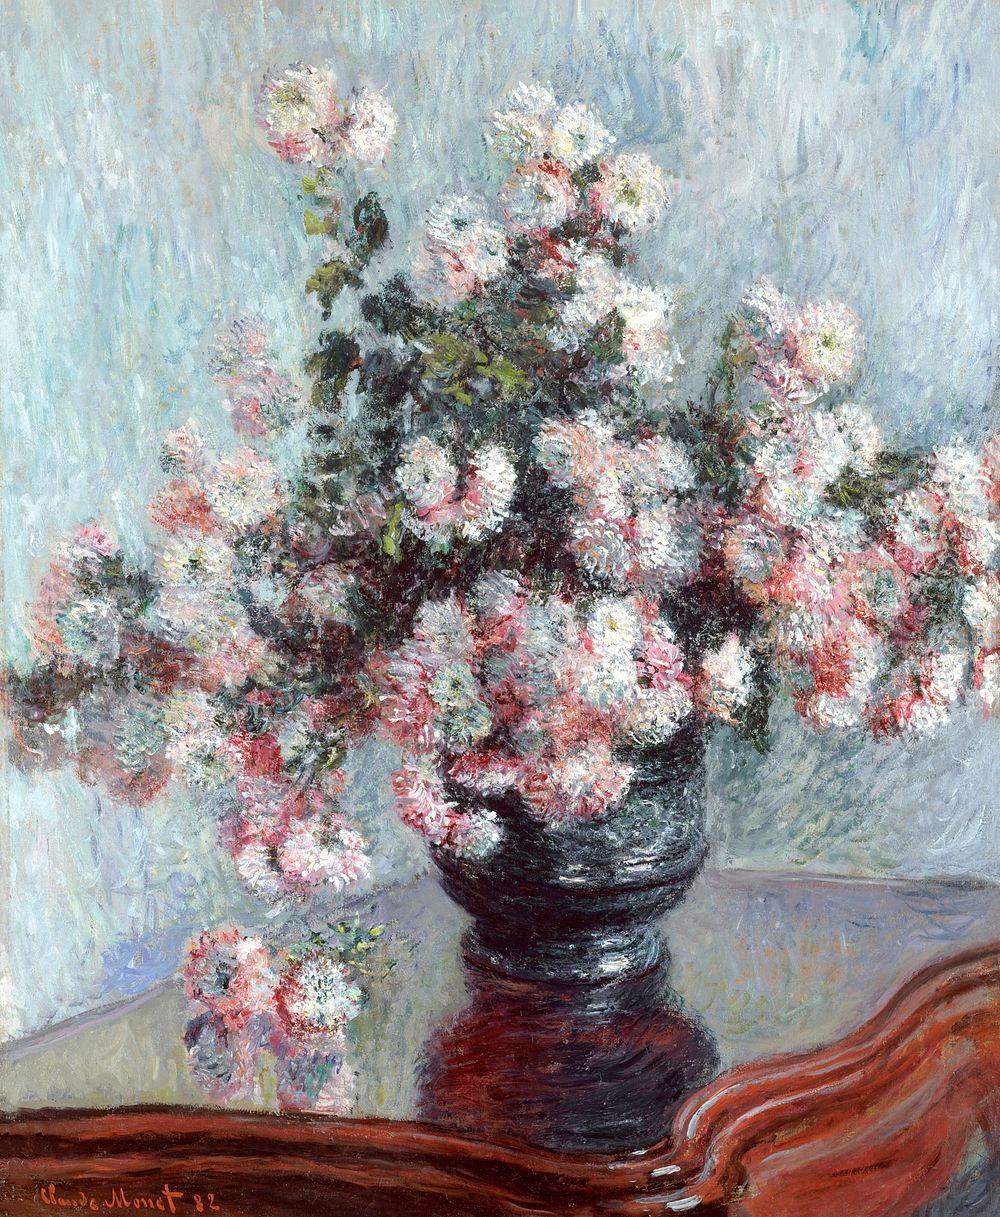 Chrysanthemums (1882) by Claude Monet, high resolution famous painting. Original from The MET. Digitally enhanced by…